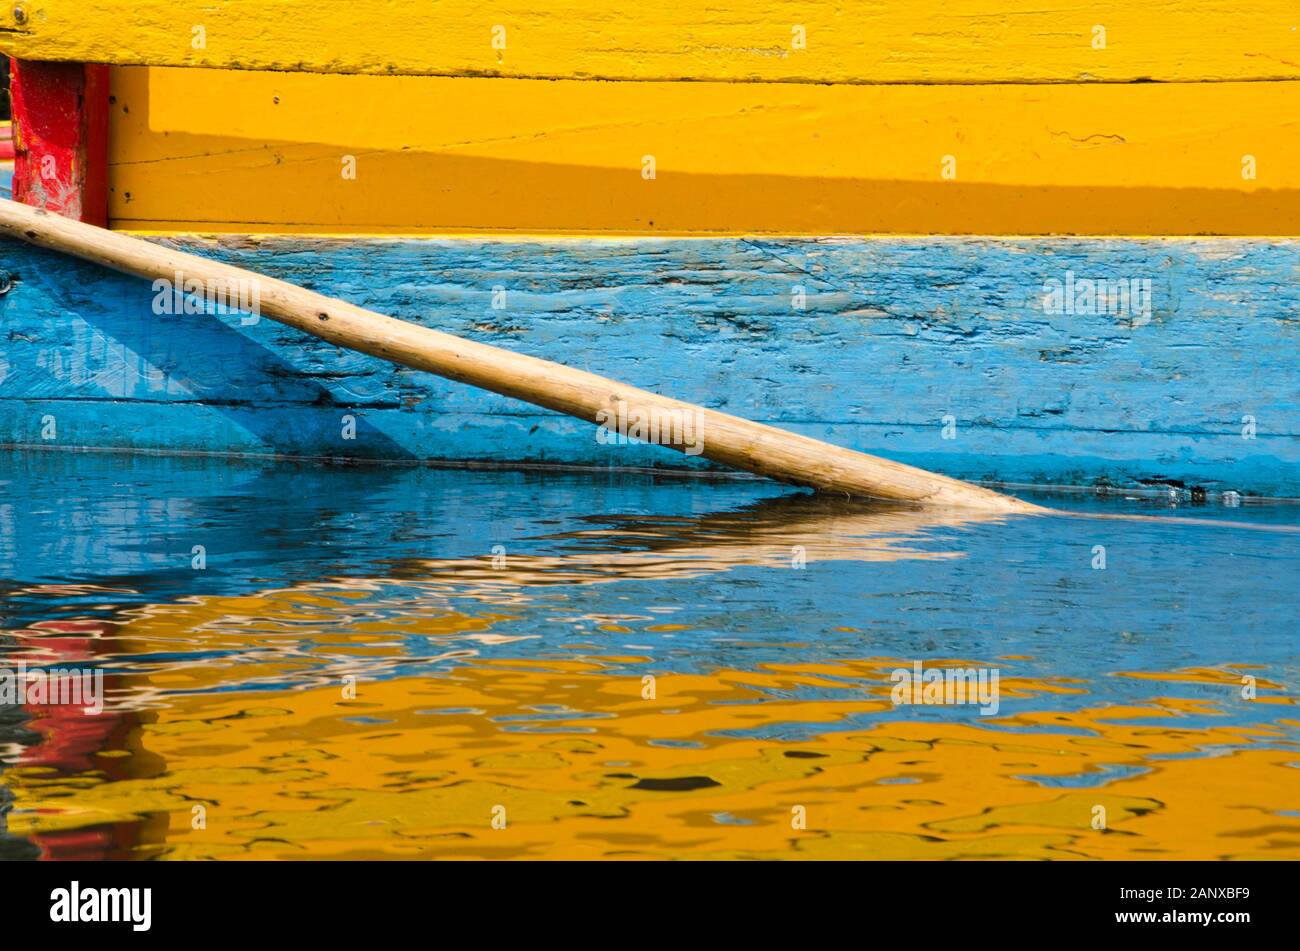 Colorful frame: detail of yellow, blue and red Trajinera boat and its reflection, in Xochimilco, Mexico Stock Photo